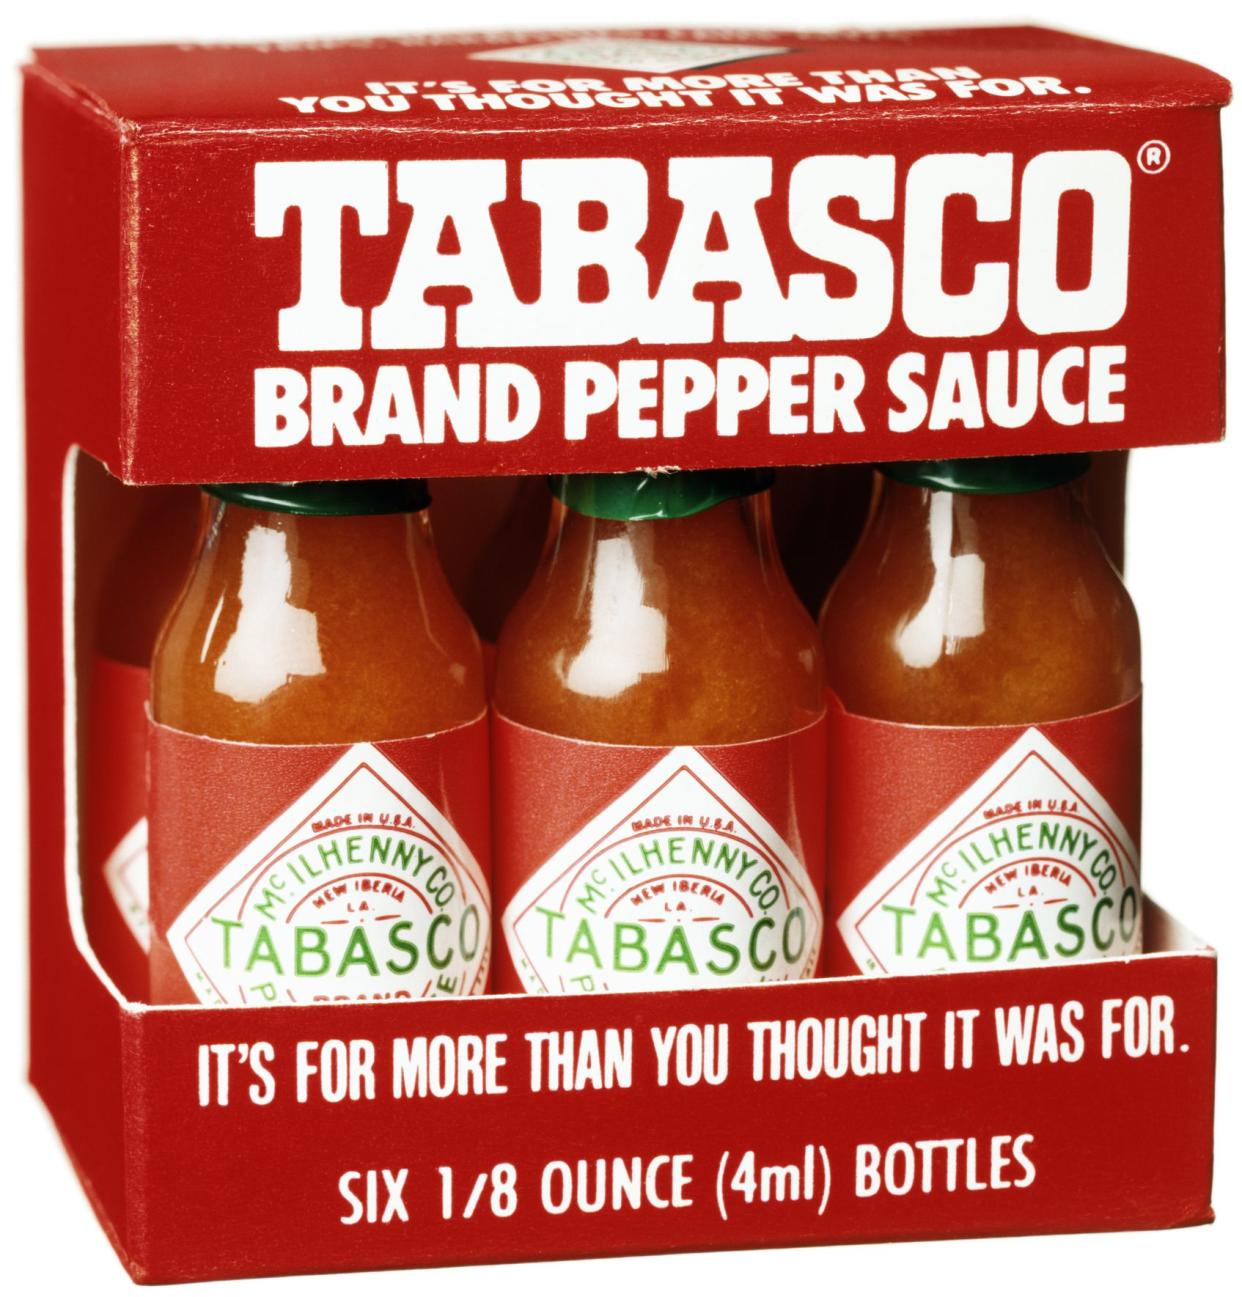 Truro, MA, USA - January 5, 2012. Three bottles of Tabasco red pepper sauce against white background.Tabasco sauce is the brand name for a hot sauce produced by US-based McIlhenny Company of Avery Island, Louisiana.